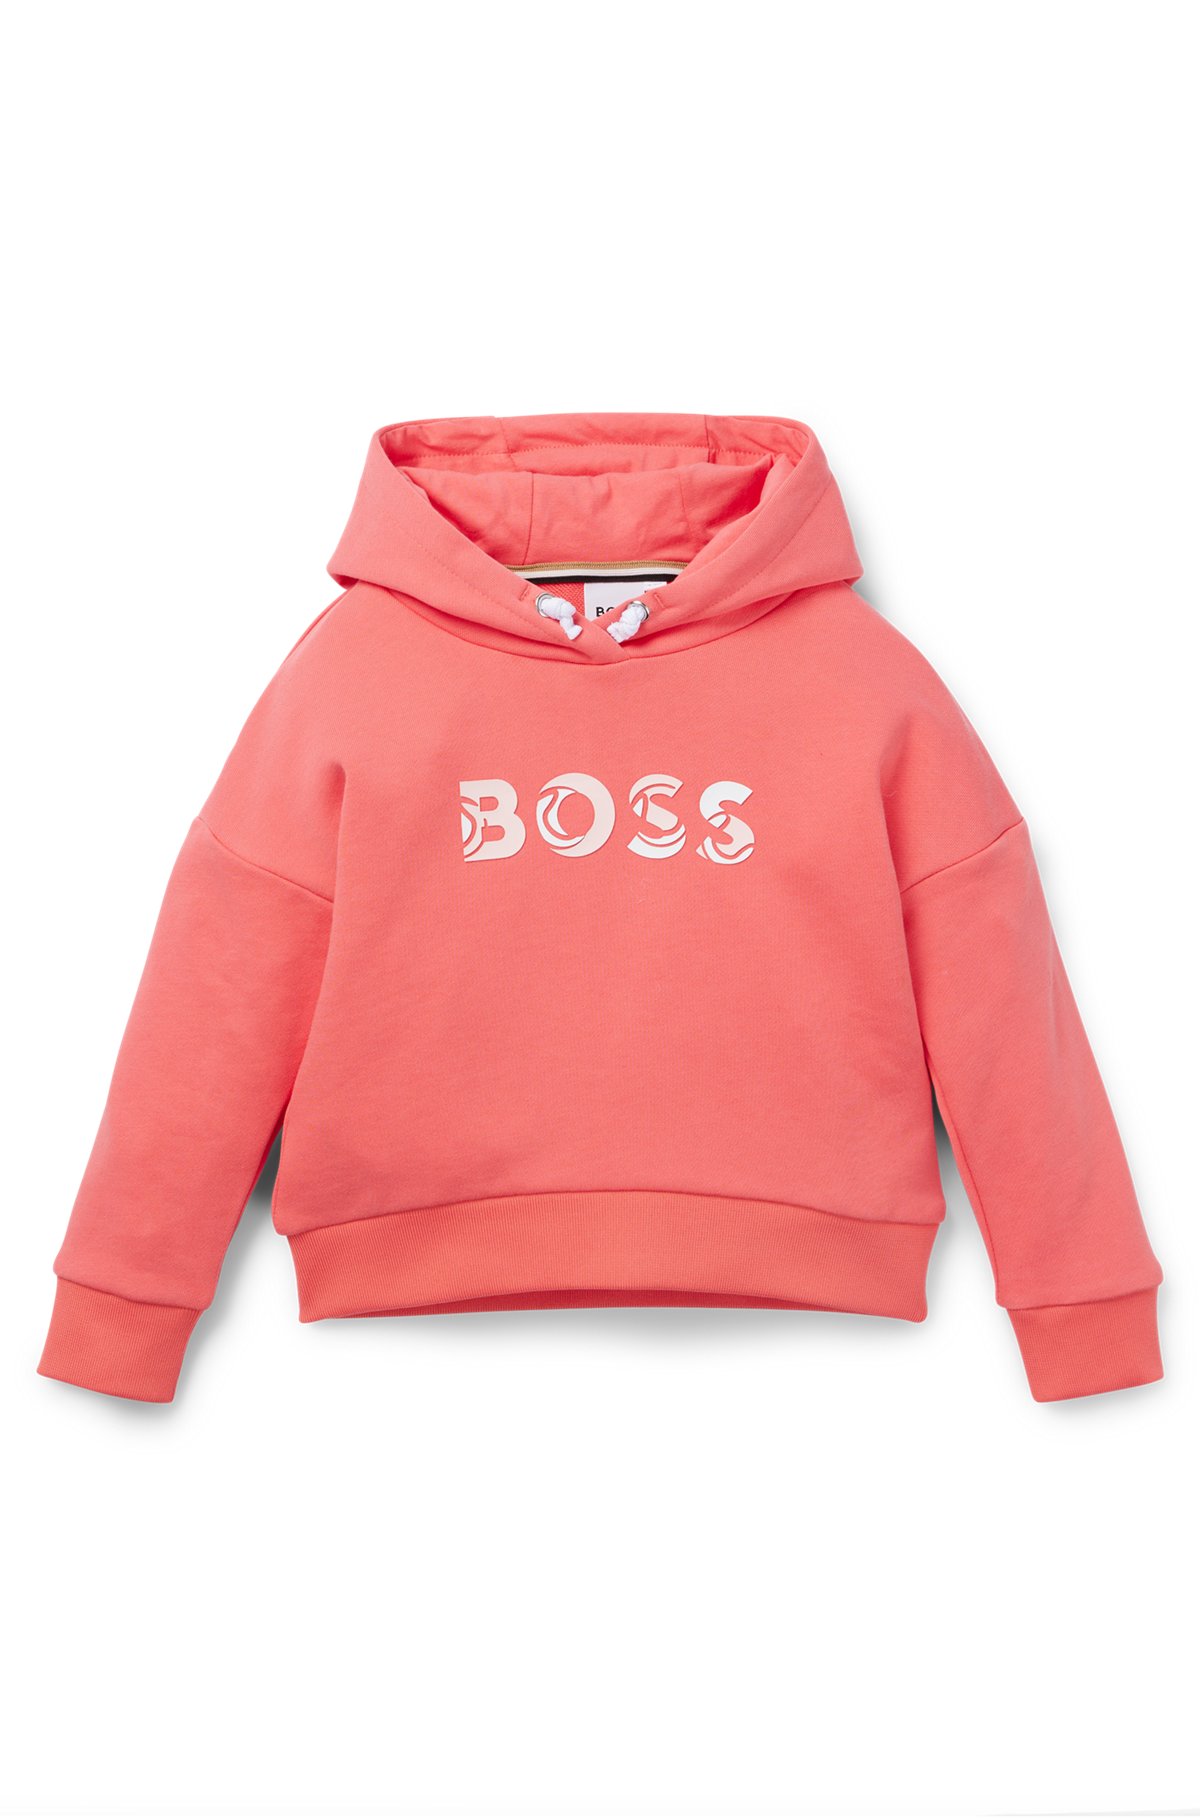 Kids' hoodie in cotton with logo detail, Light Red